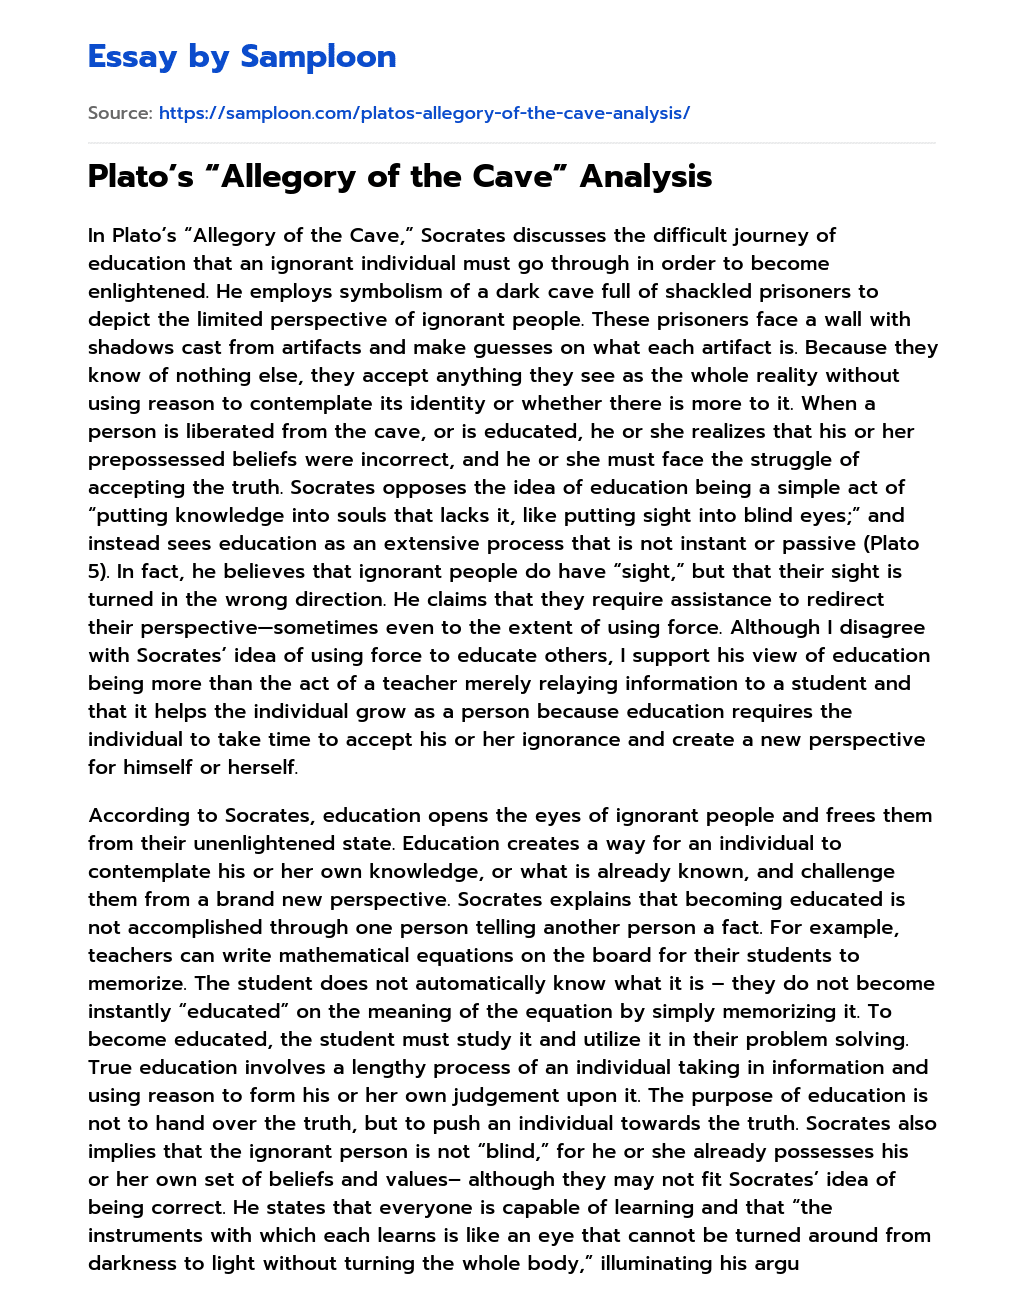 Plato’s “Allegory of the Cave” Analysis essay